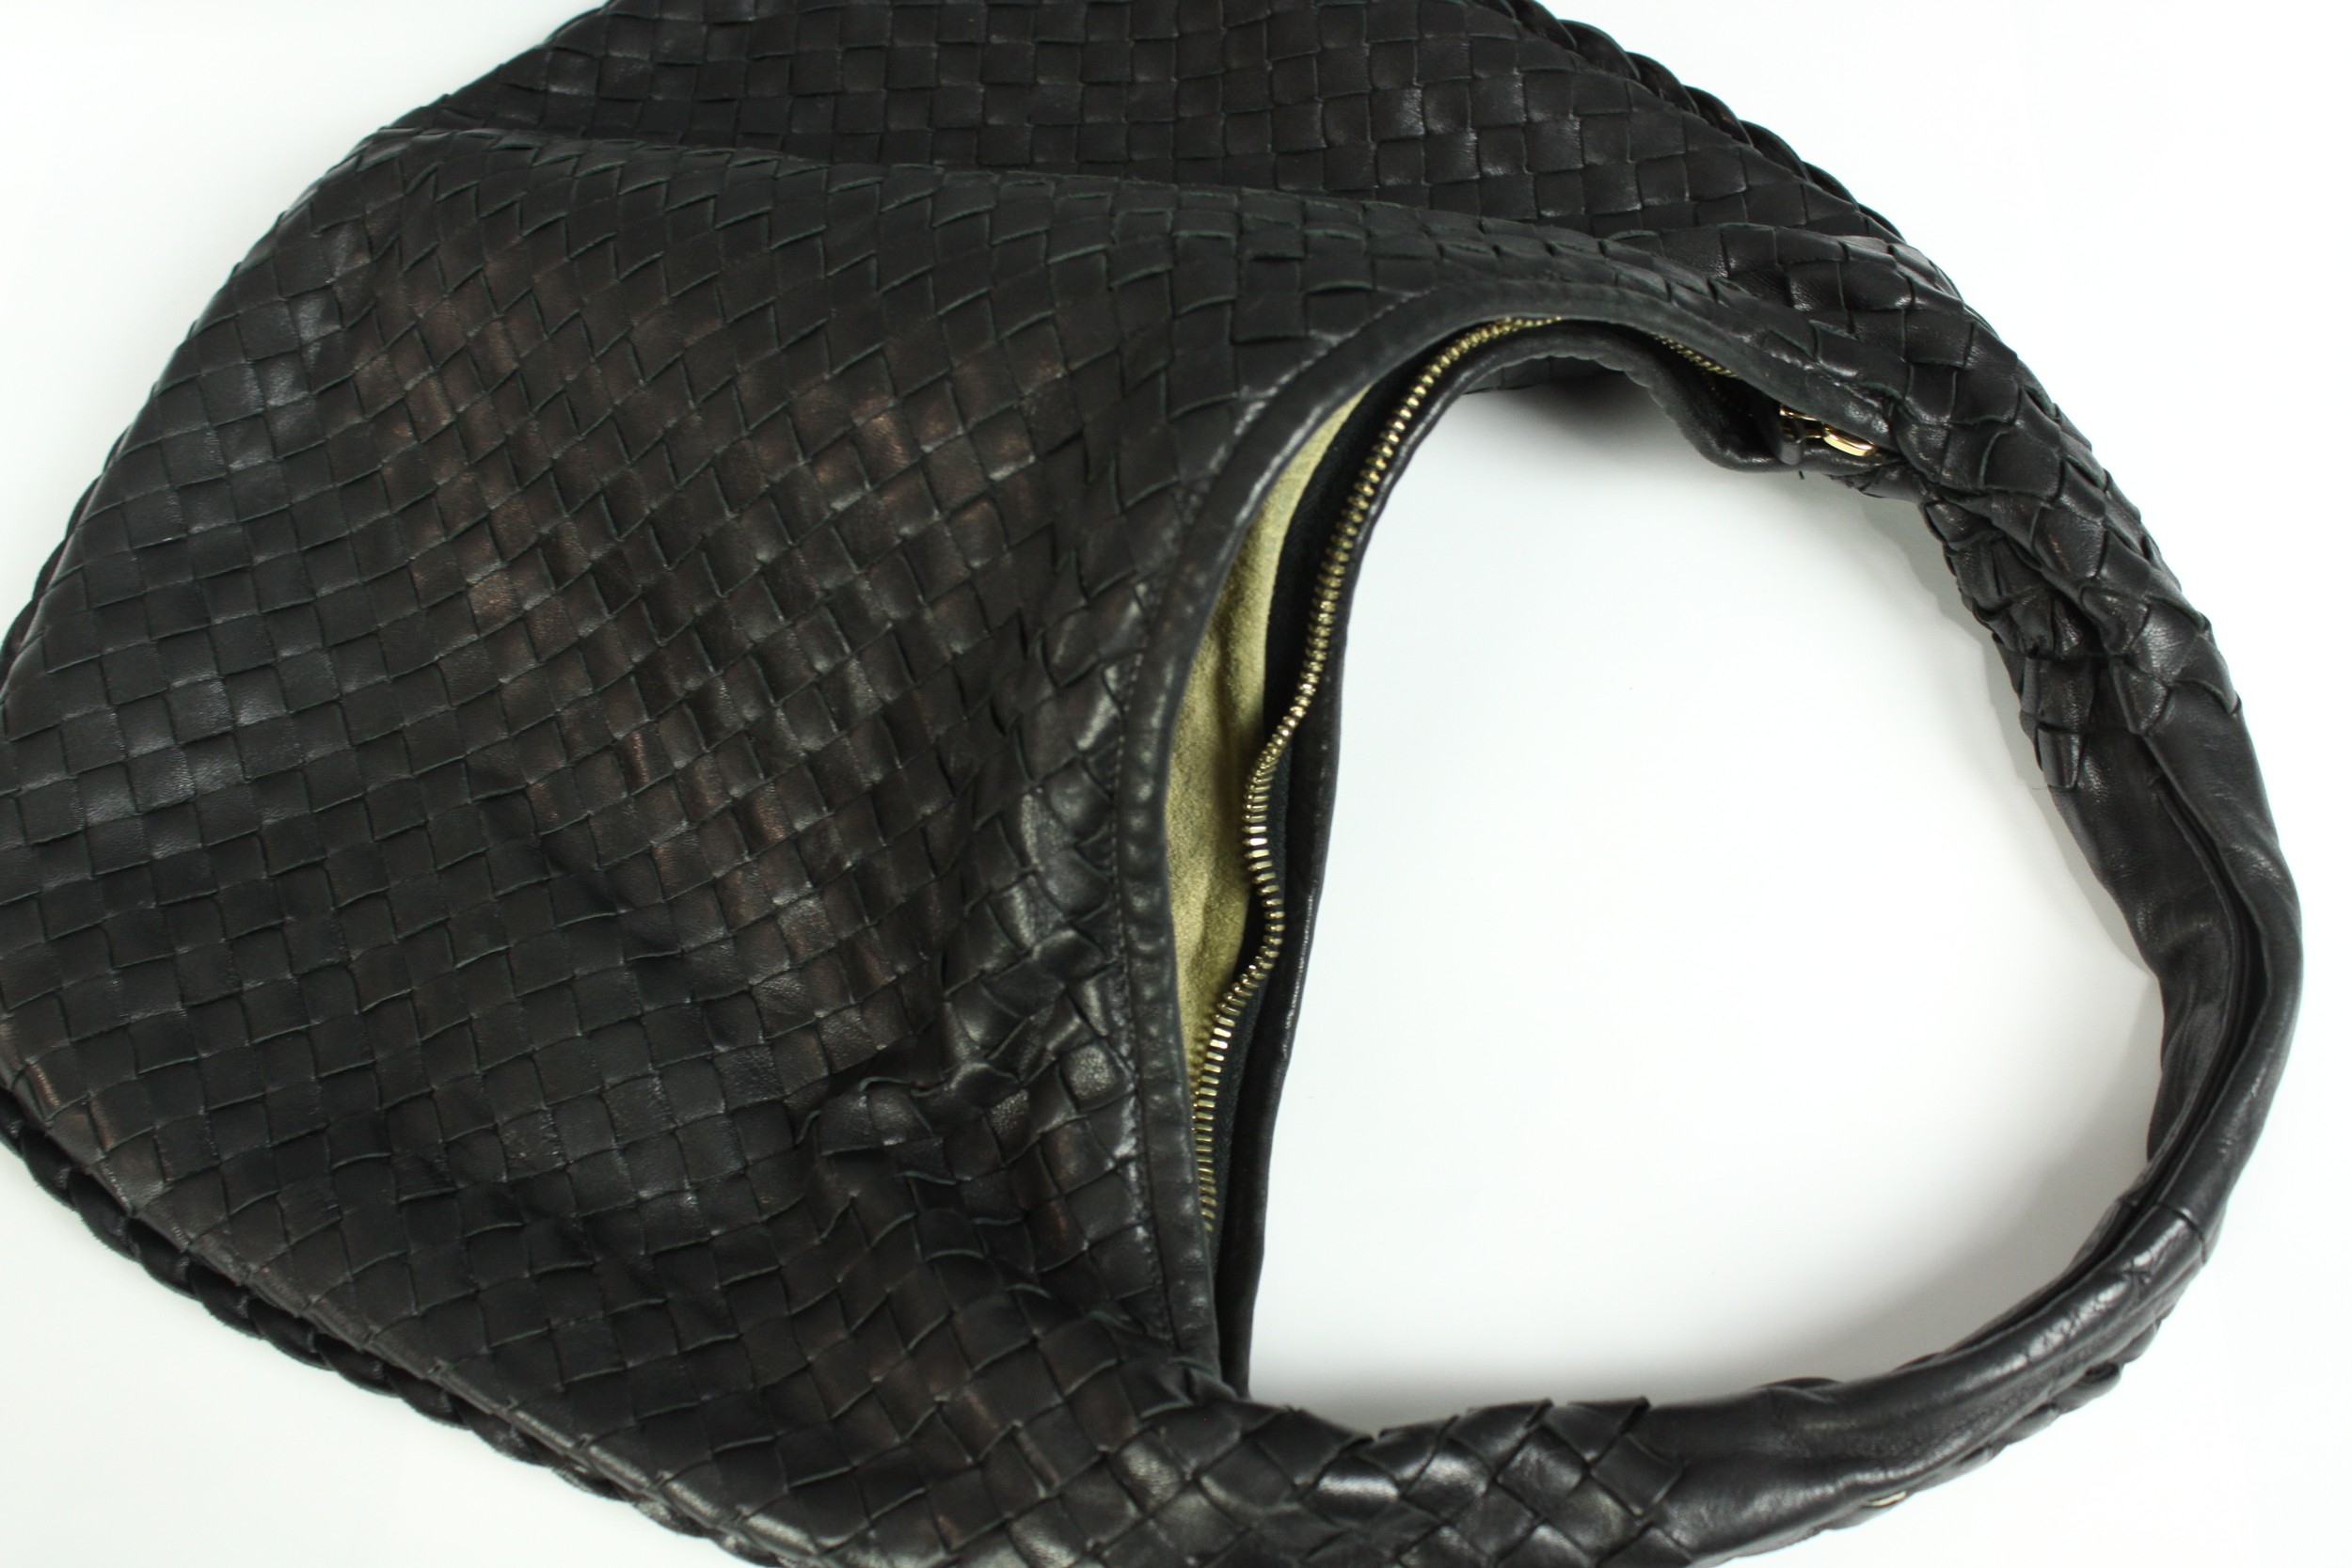 A Bottega Veneta shoulder bag. Intrecciato black leather. With a suede inlay and calf leather shell. - Image 2 of 5